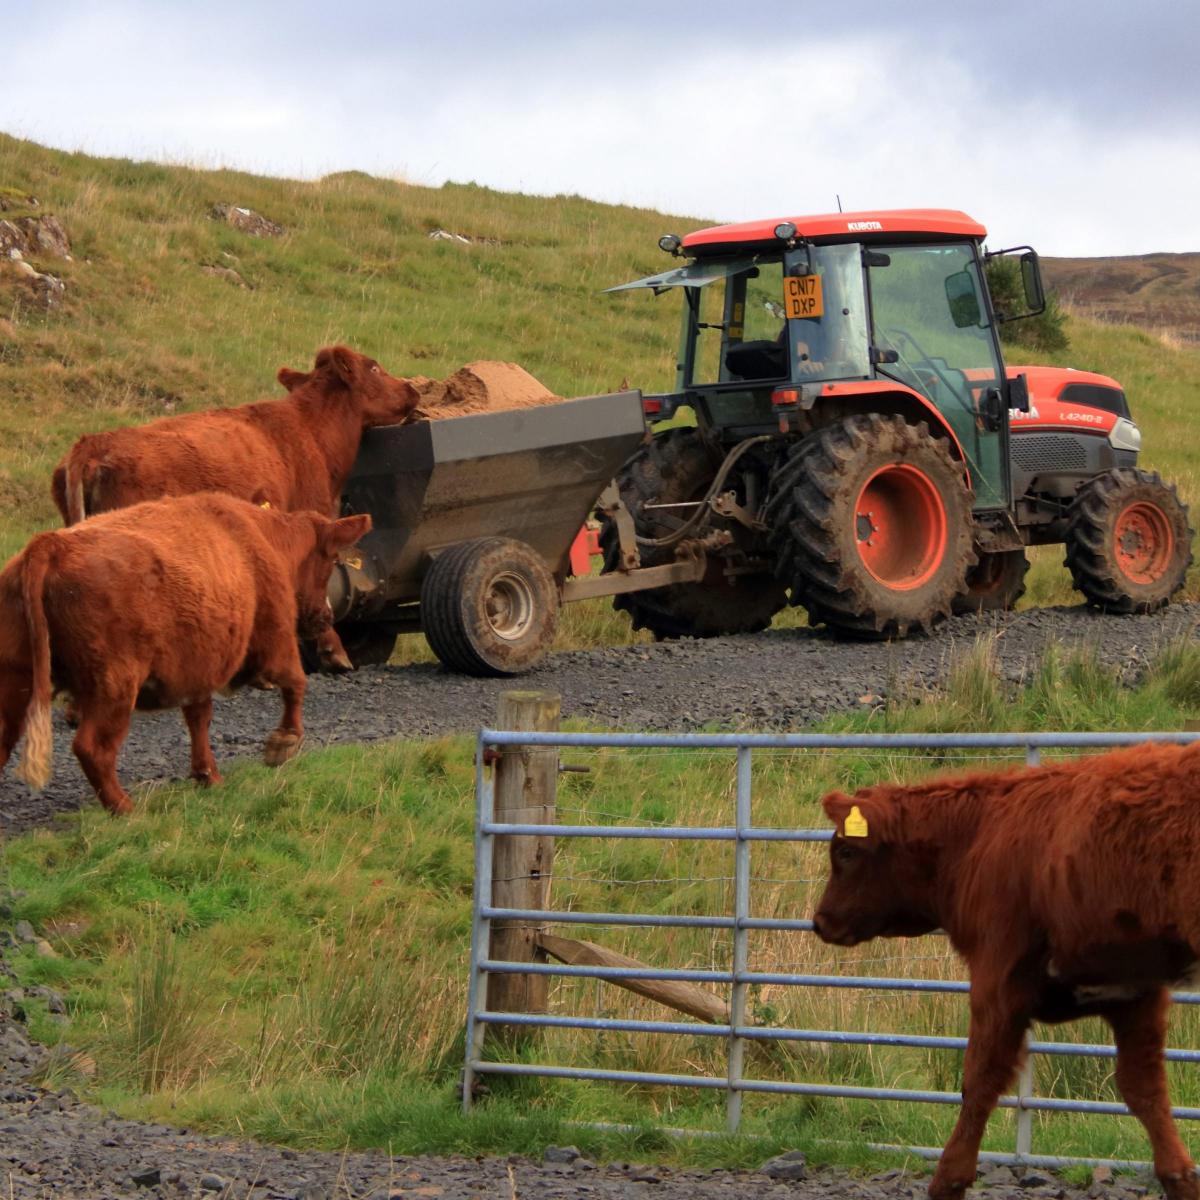 Rhonda @ Drimnin Estate - Who needs the 'carrot or stick' approach to animal logistics operations when you have Nc'nean Distillery draff at Drimnin Estate Farm